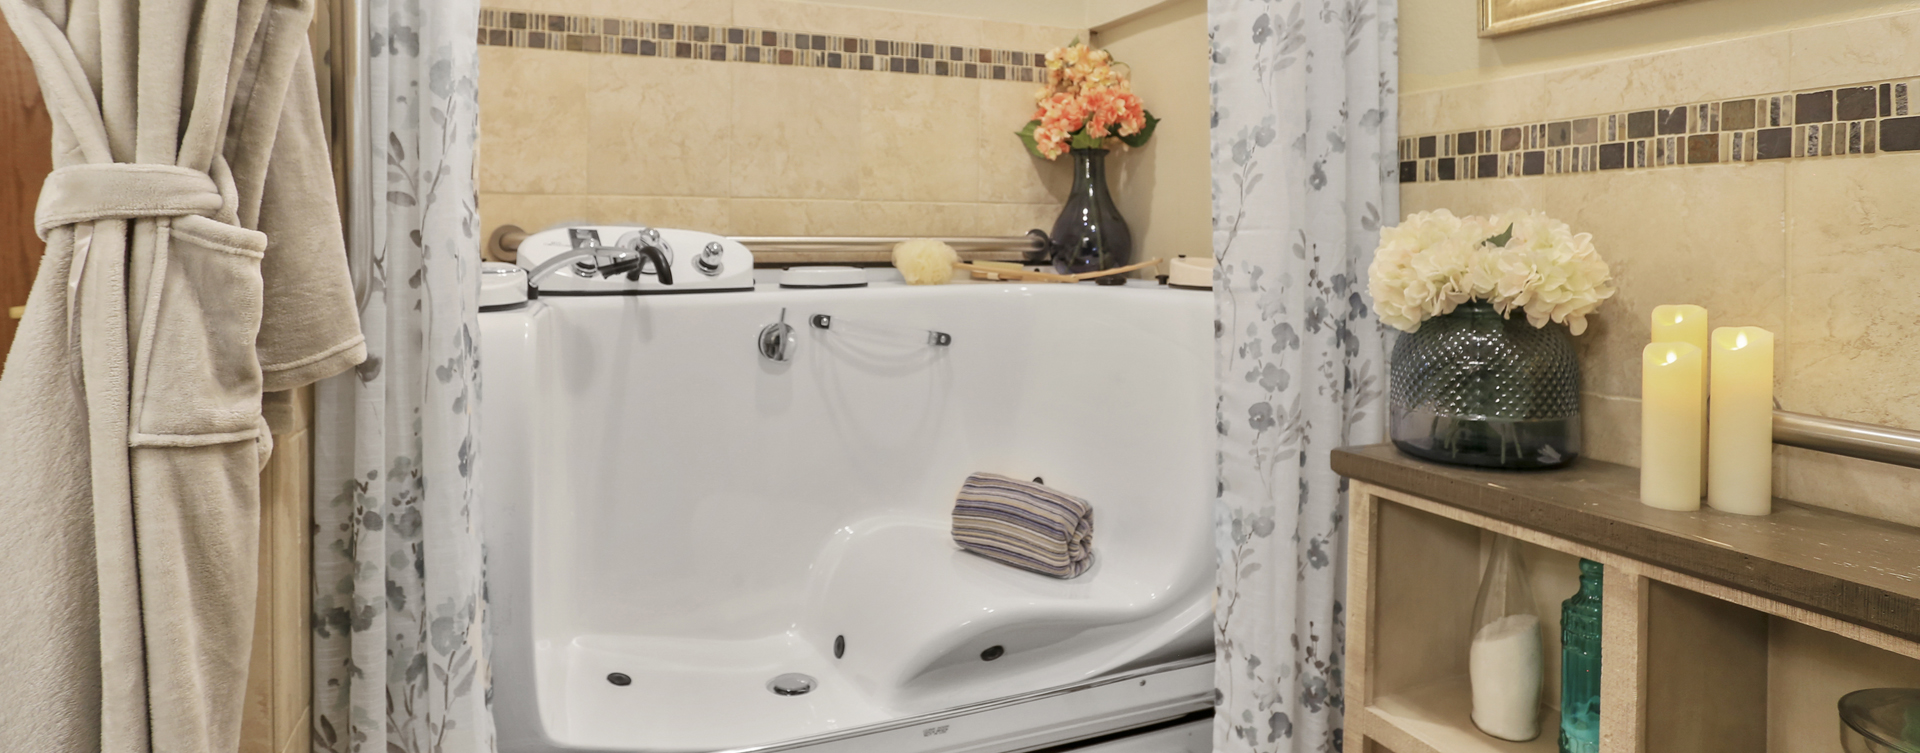 With an easy access design, our whirlpool allows you to enjoy a warm bath safely and comfortably at Bickford of Champaign